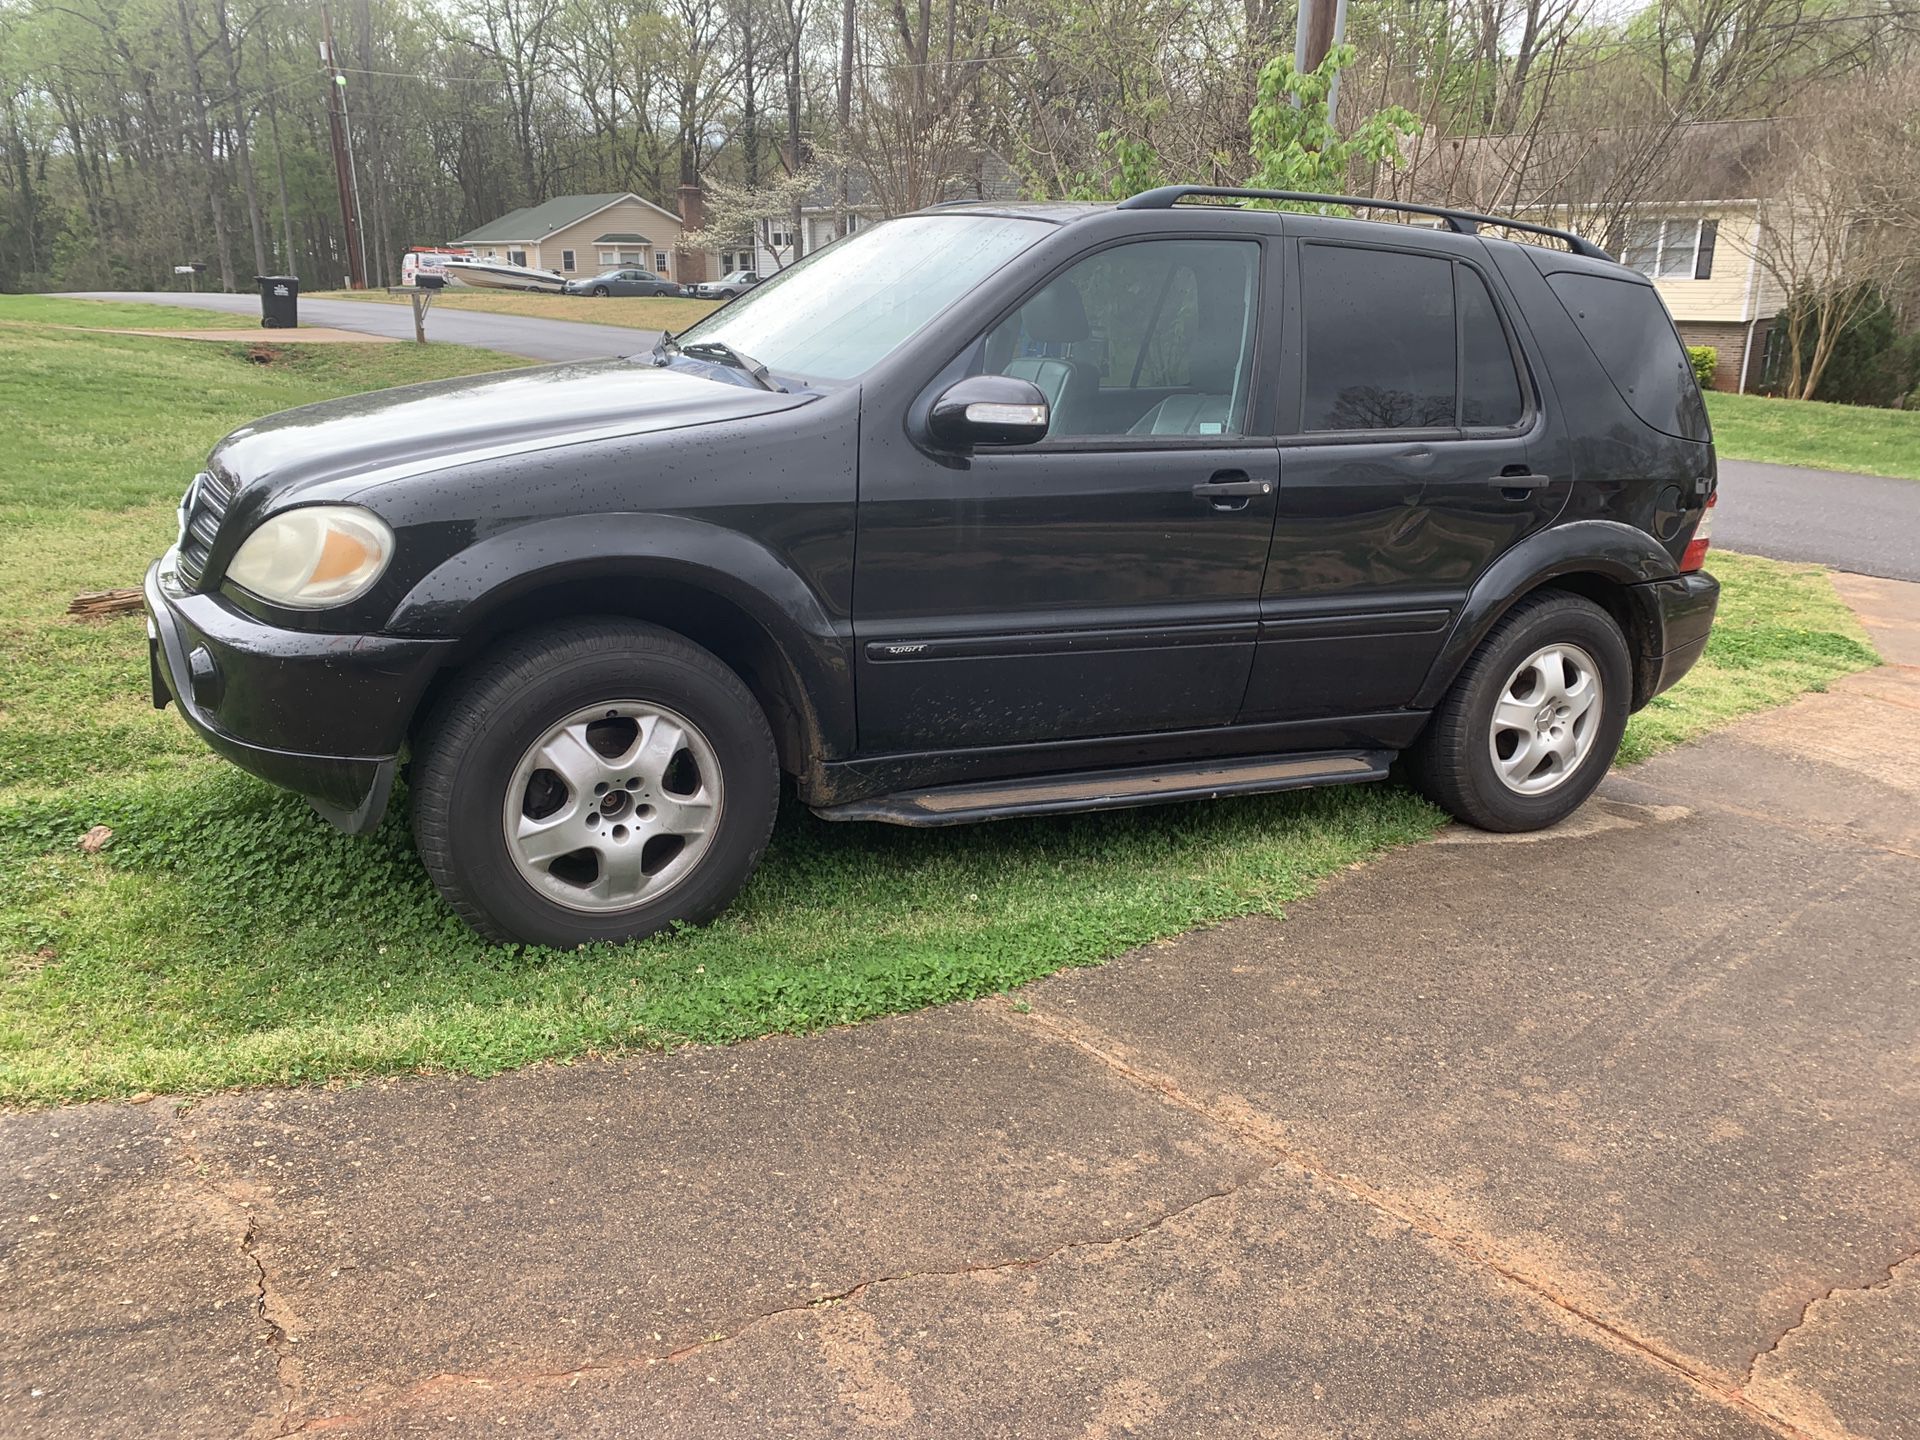 2004 Mercedes-Benz M-Class for Sale in Belmont, NC - OfferUp